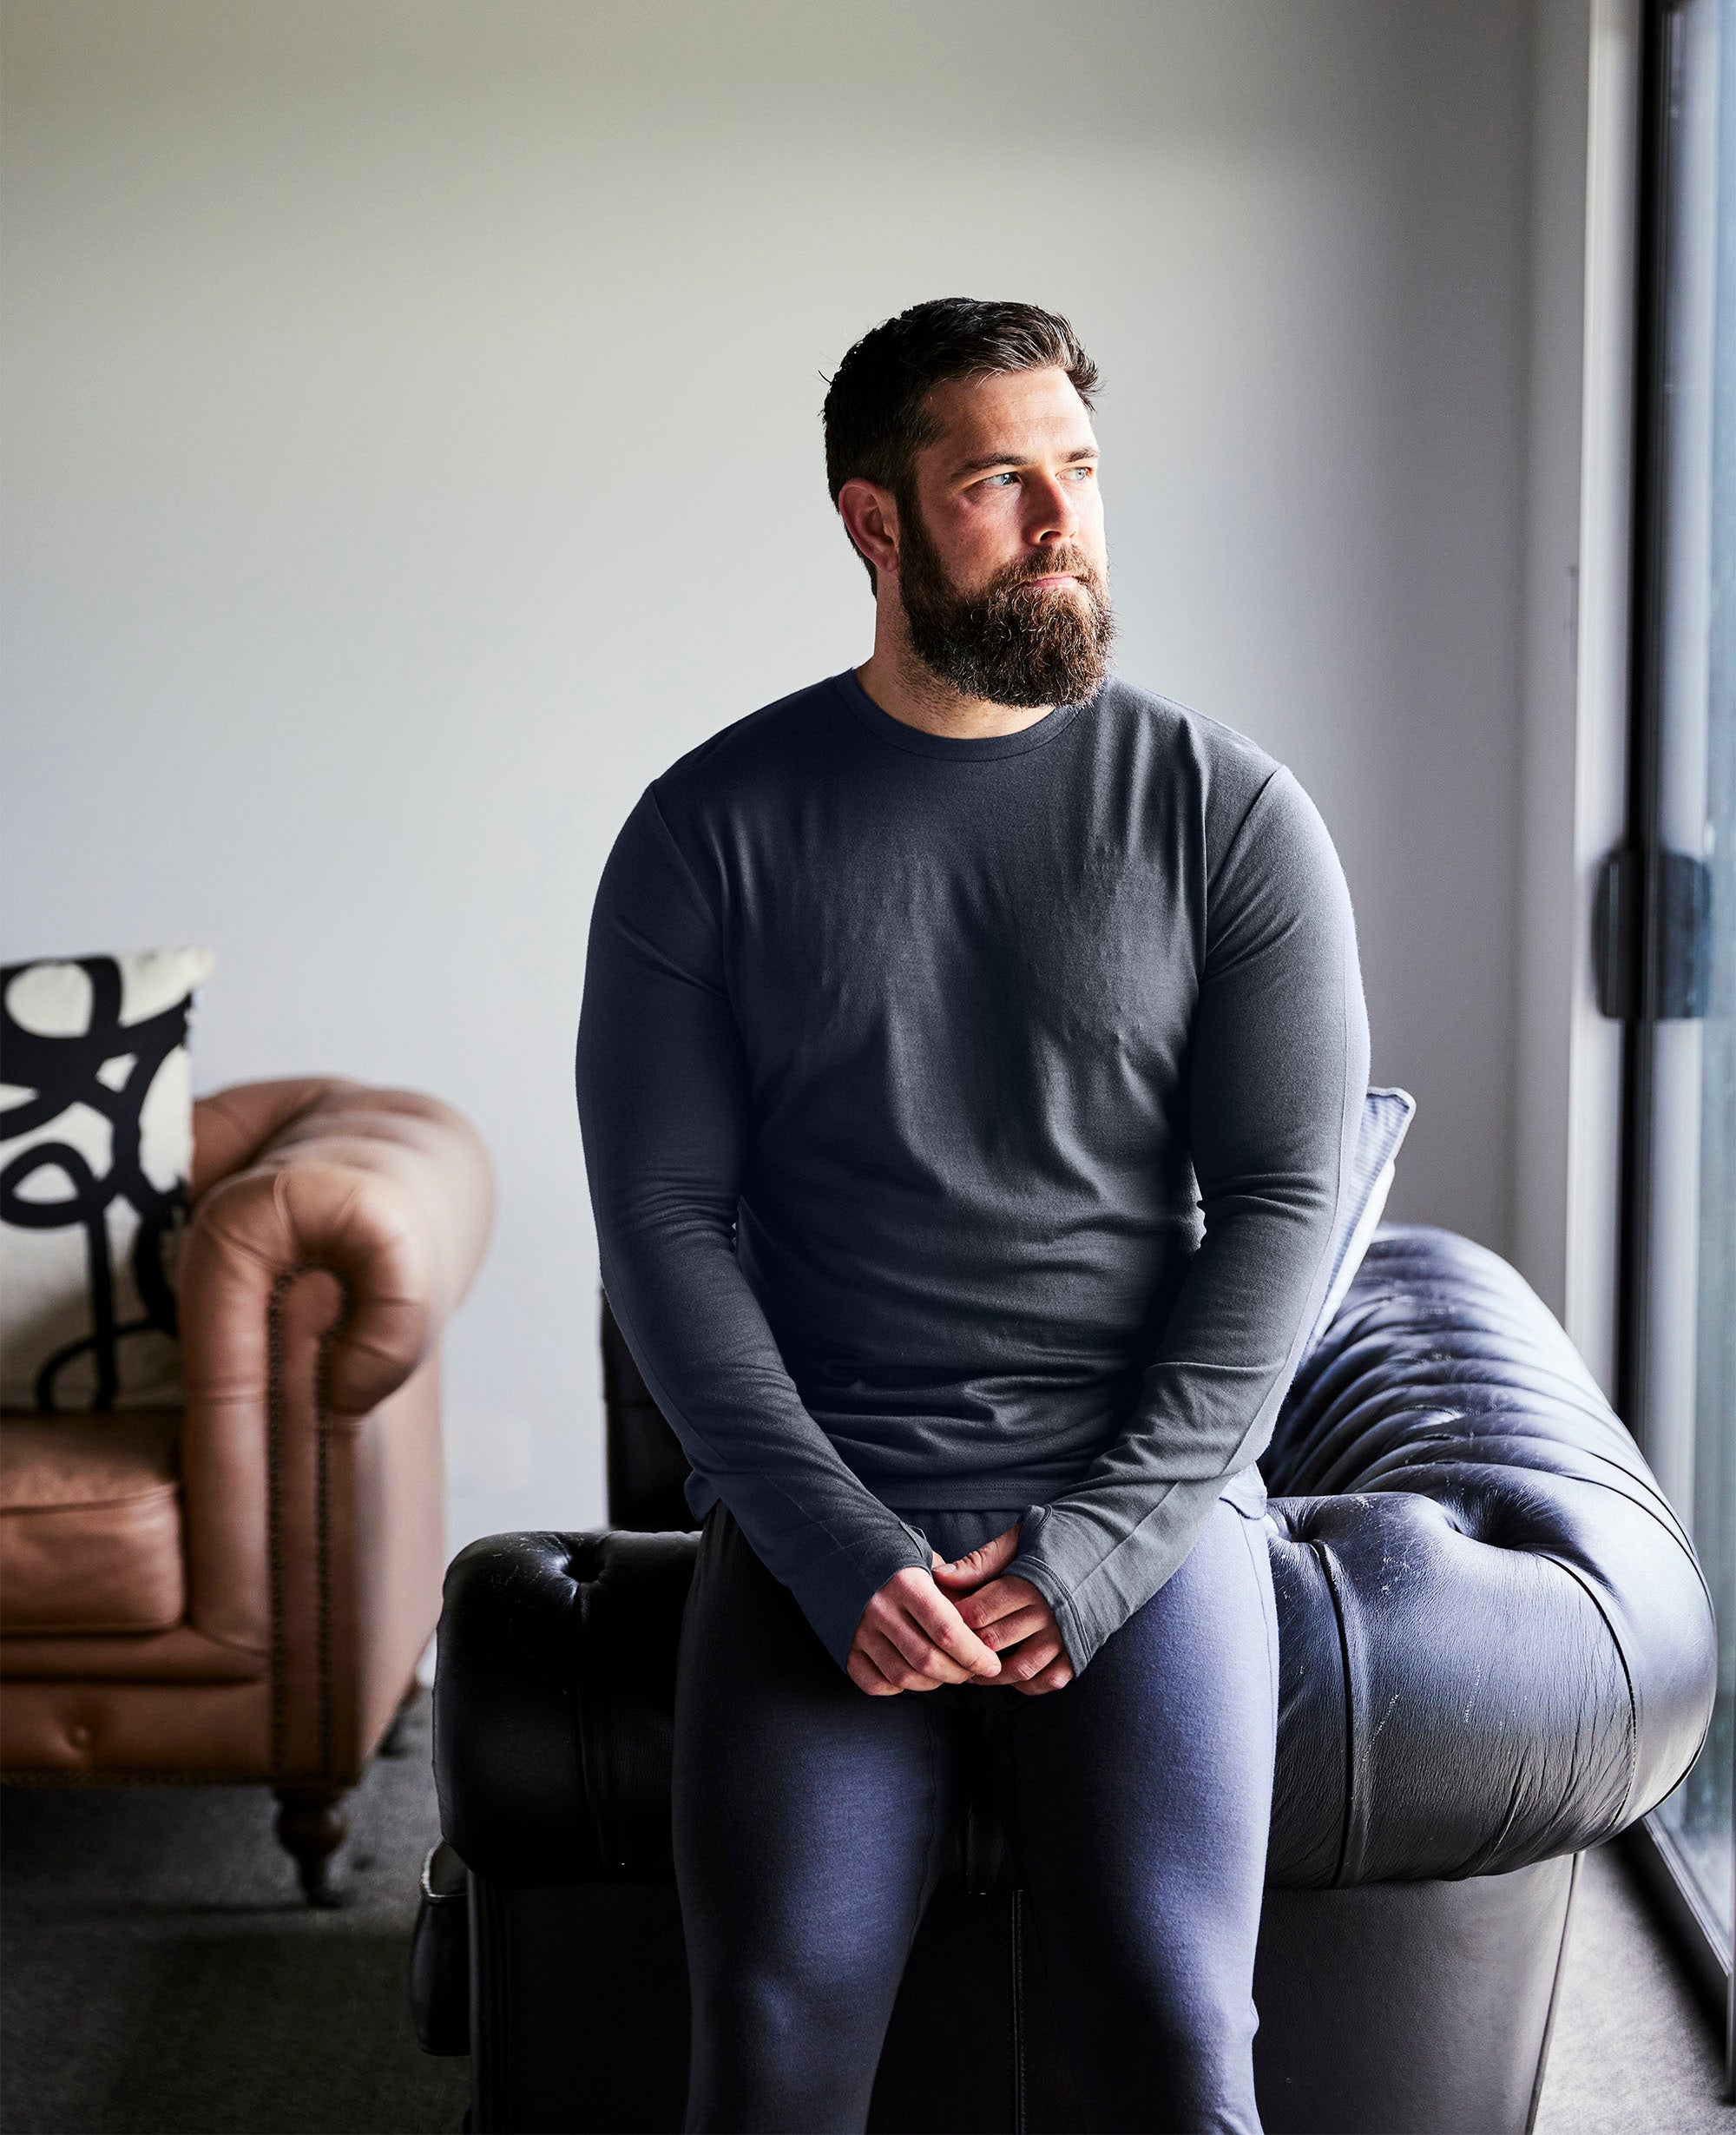 Merino 365 OG Long Sleeve with Thumbloops Top, Charcoal Marle